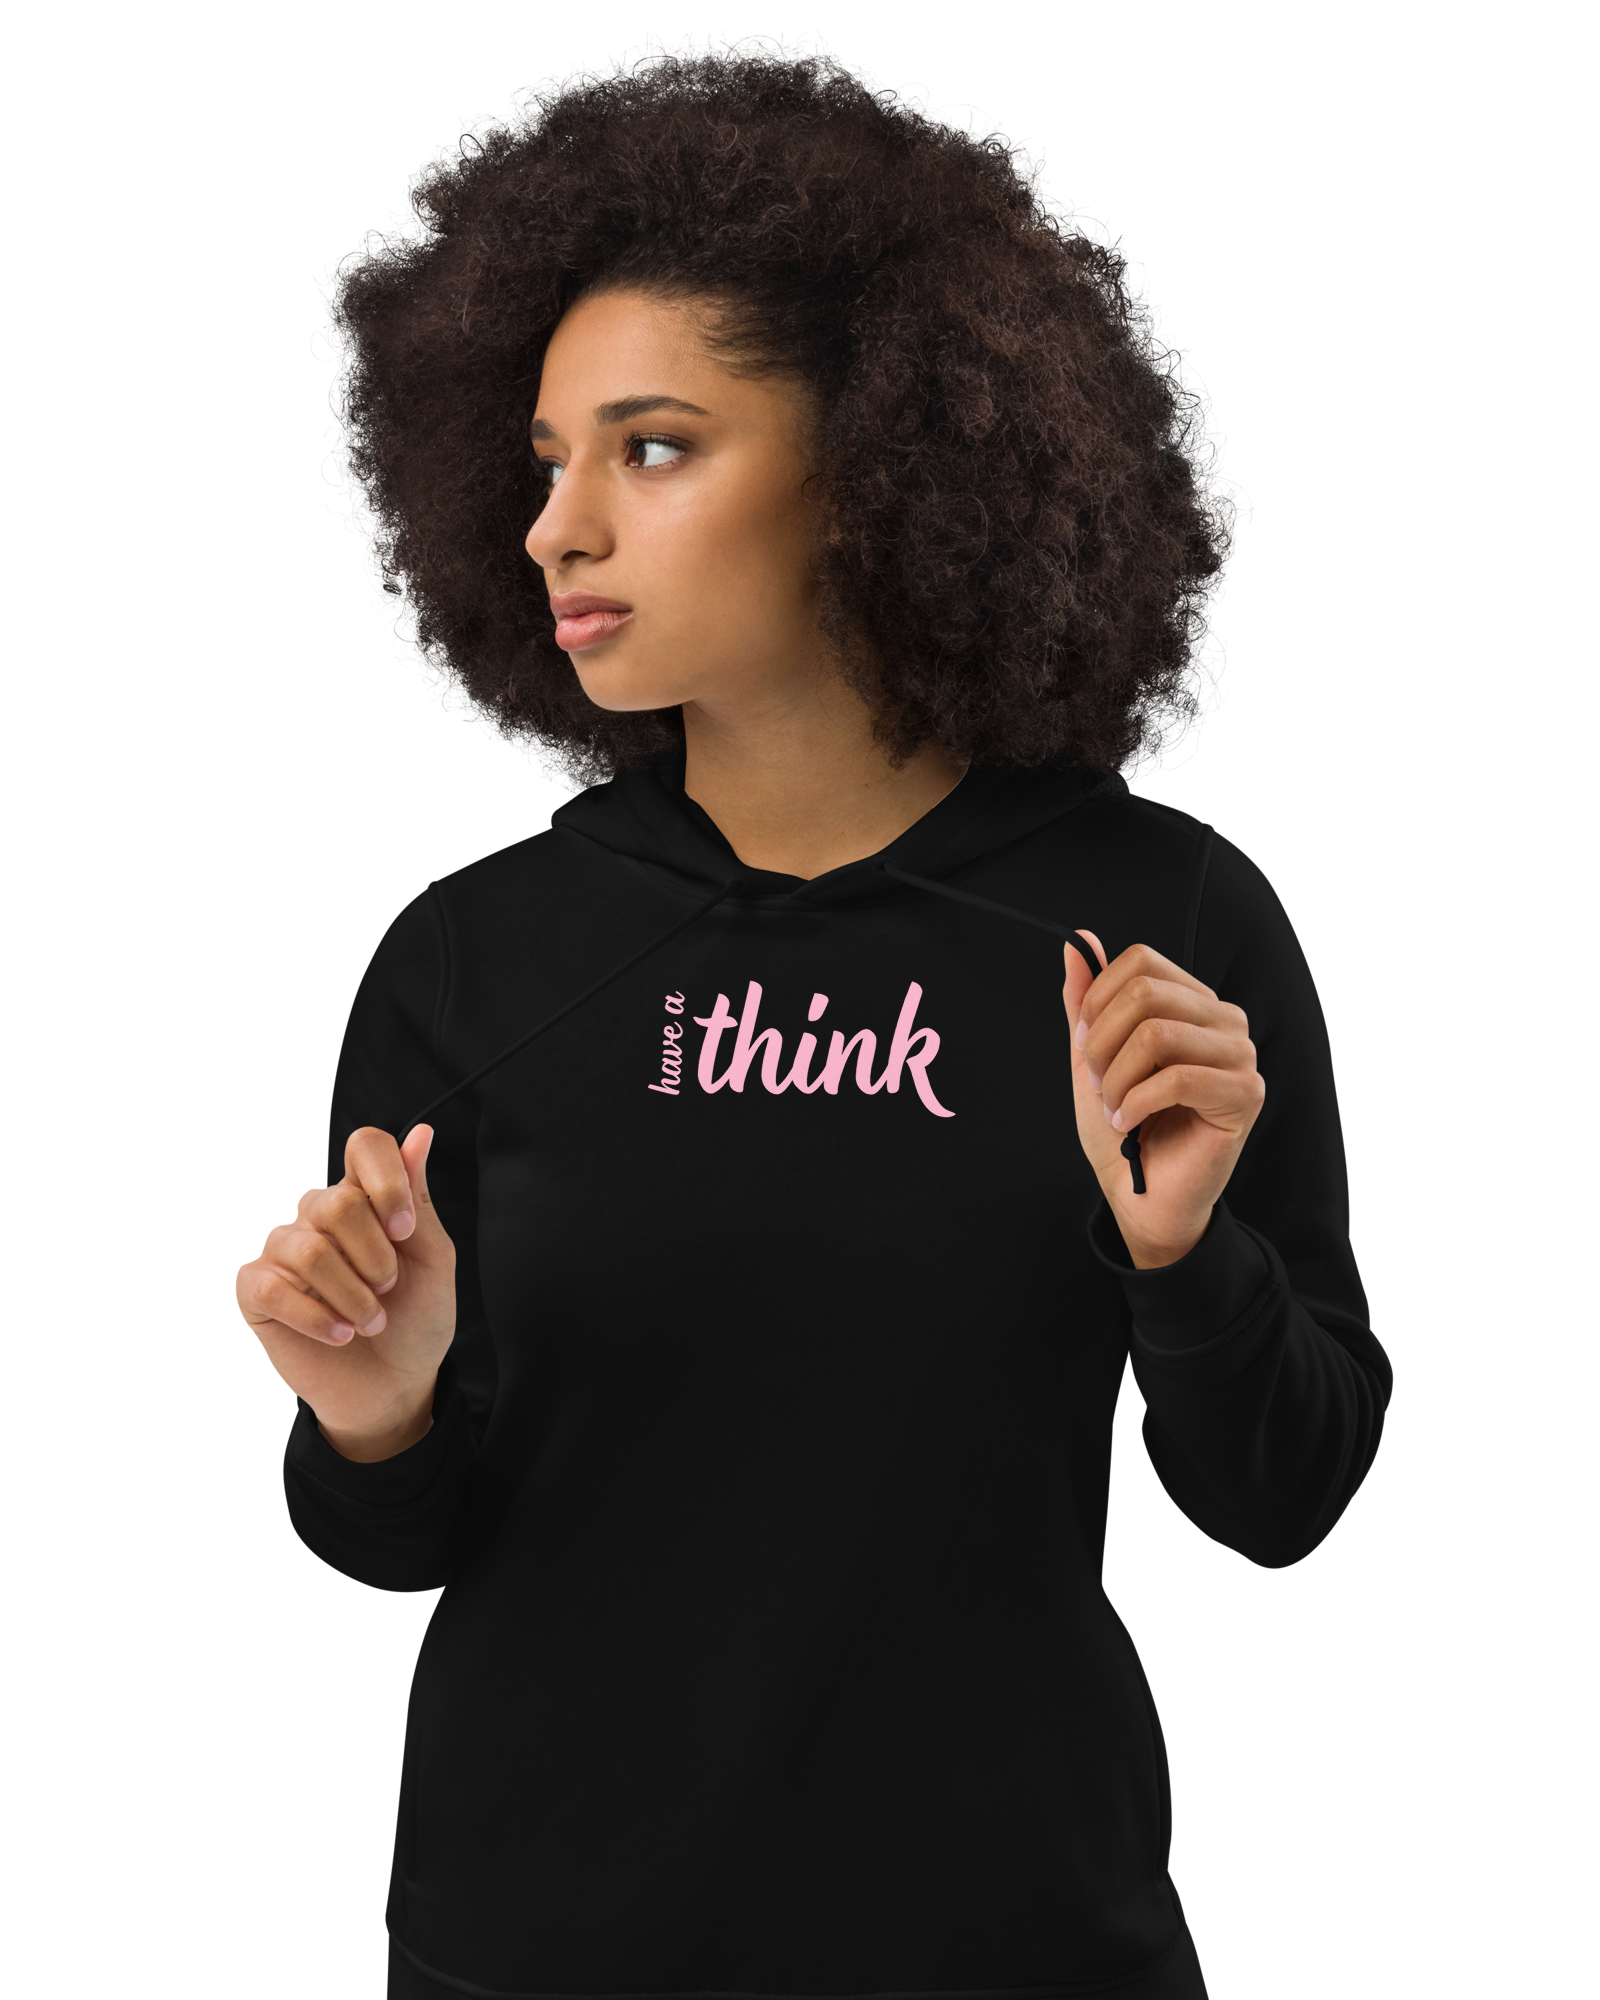 Inspire others to Have a Think with the fun and fabulous Have a Think collection of clothes and gifts, including crop tops, women's shirts, t-shirt dresses, sports bras, yoga leggings